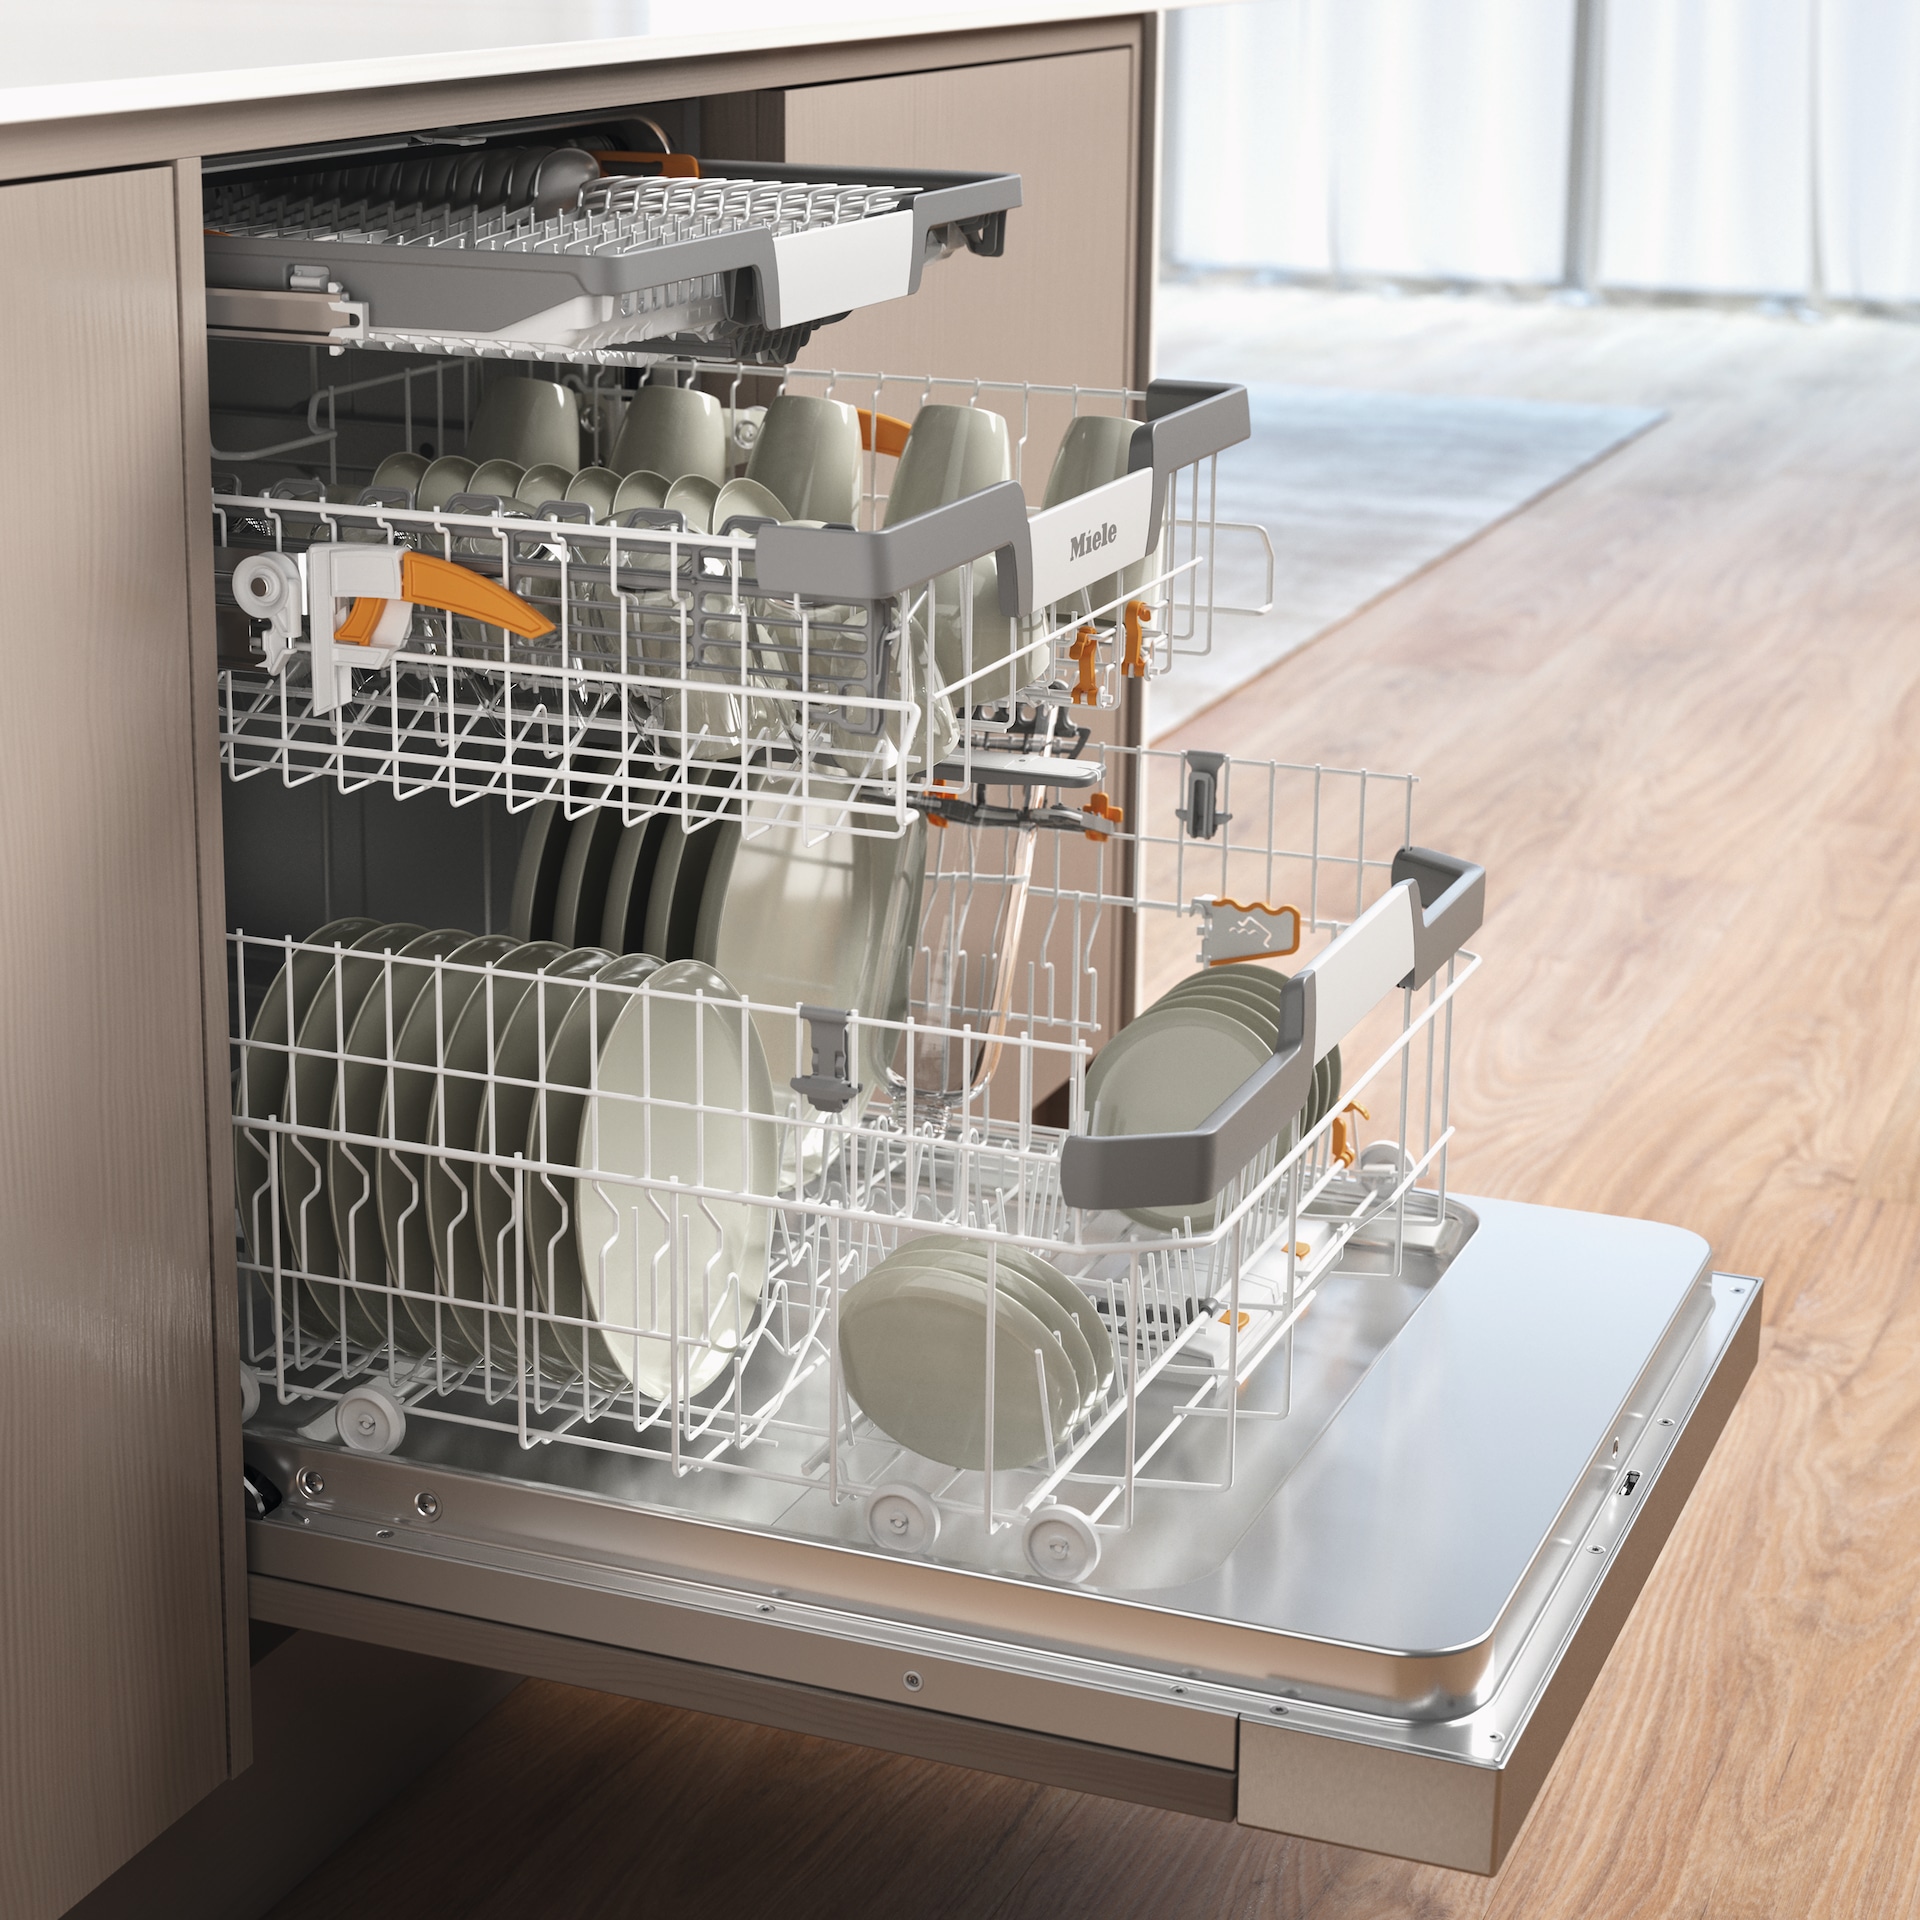 Dishwashers - G 7210 SCi Stainless steel/CleanSteel - 3